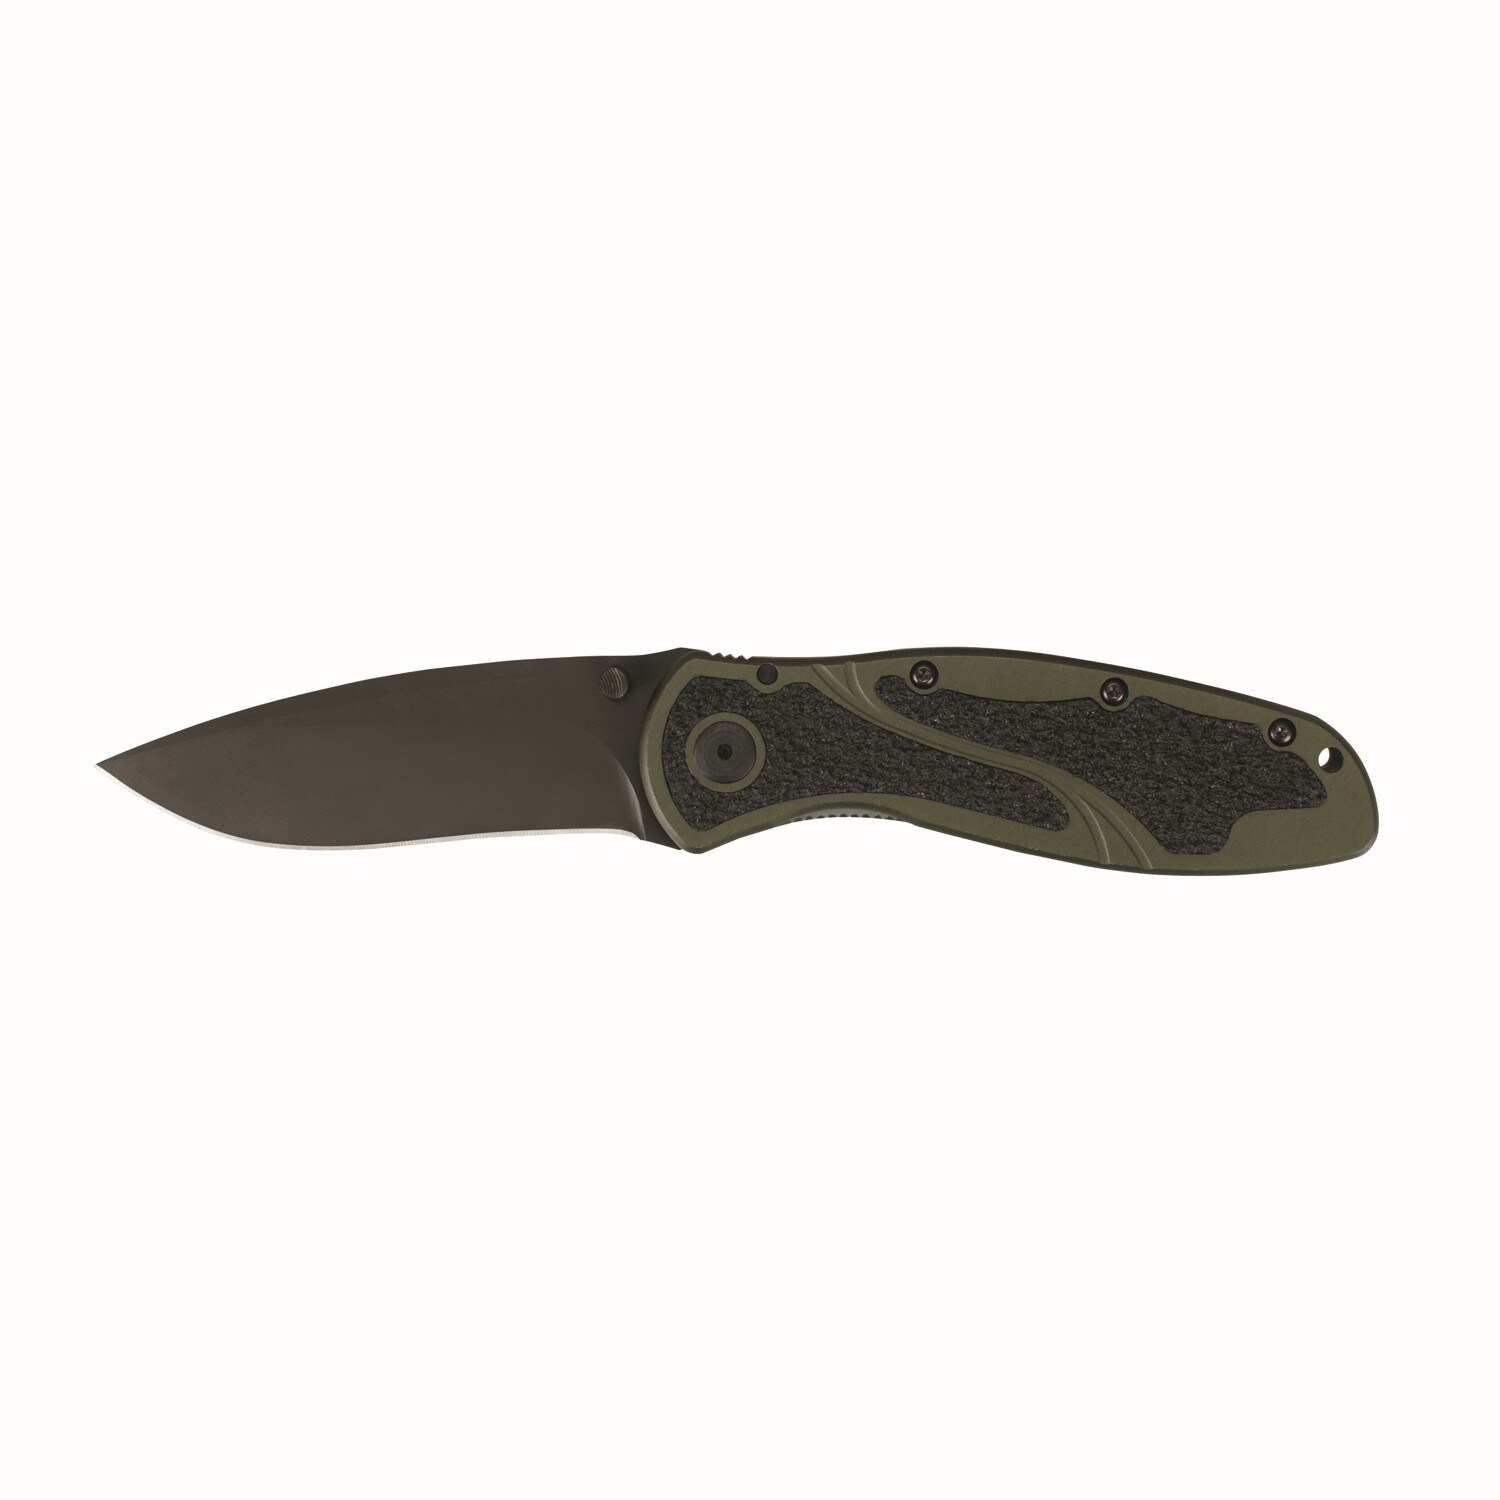 Kershaw Blur Olive Drab Black Blade Folding Knife (Olive DrabBlade materials Sandvik 14C28N ,6061 T6 anodized aluminum, Trac Tec insertsHandle materials 6061 T6 anodized aluminumBlade length 3.375 inches Handle length 4.5 inches Weight 0.5Dimensions